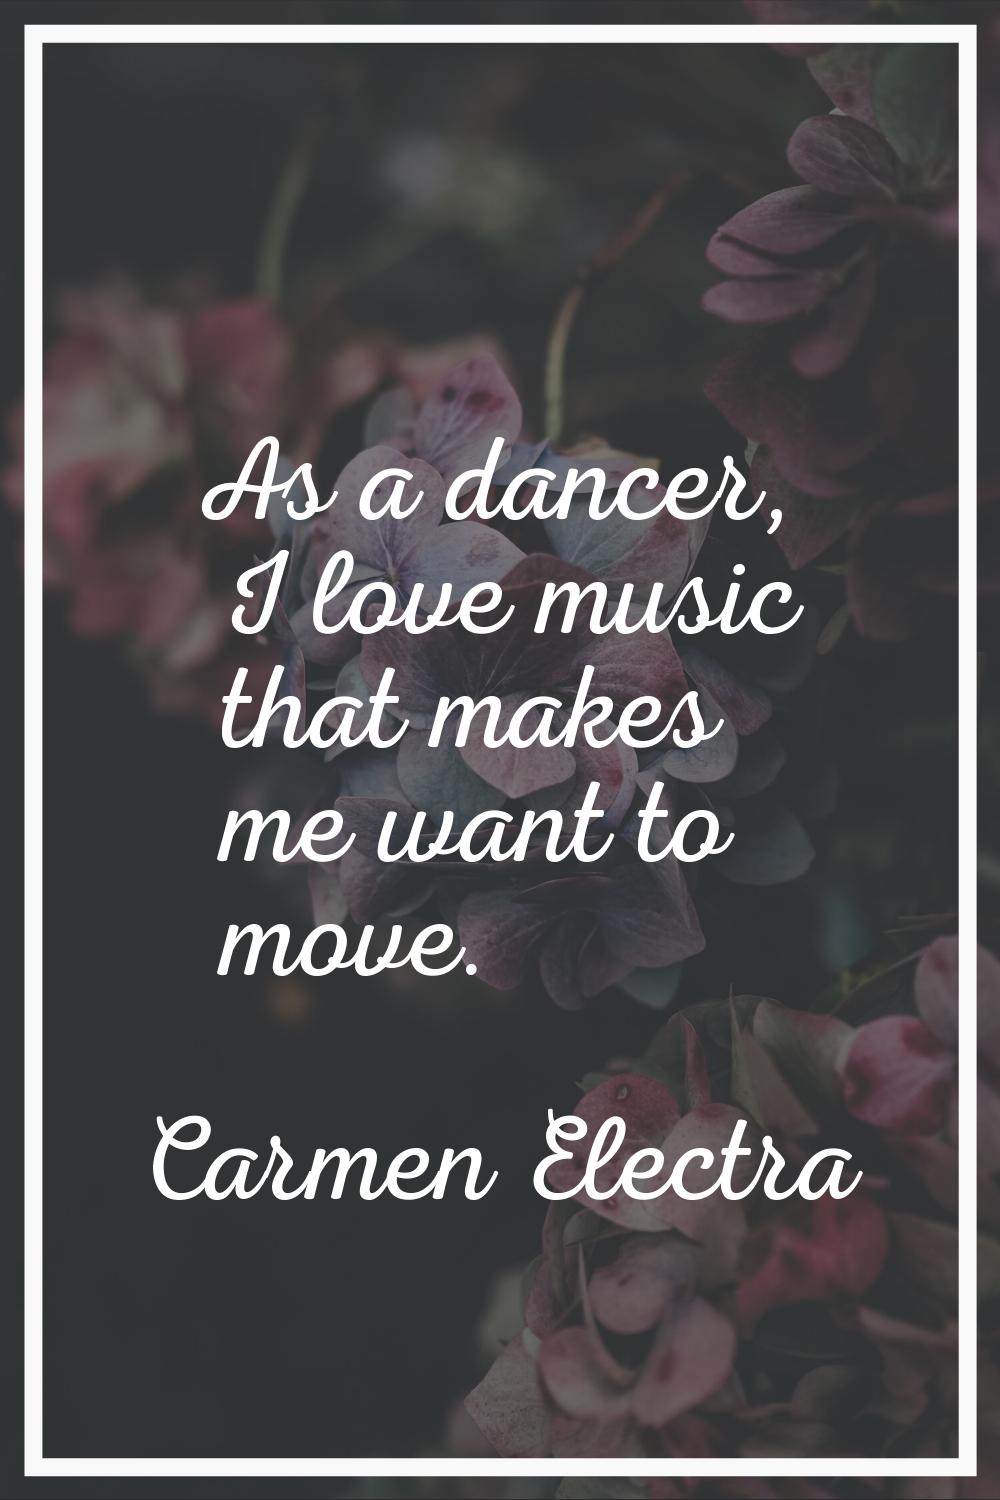 As a dancer, I love music that makes me want to move.